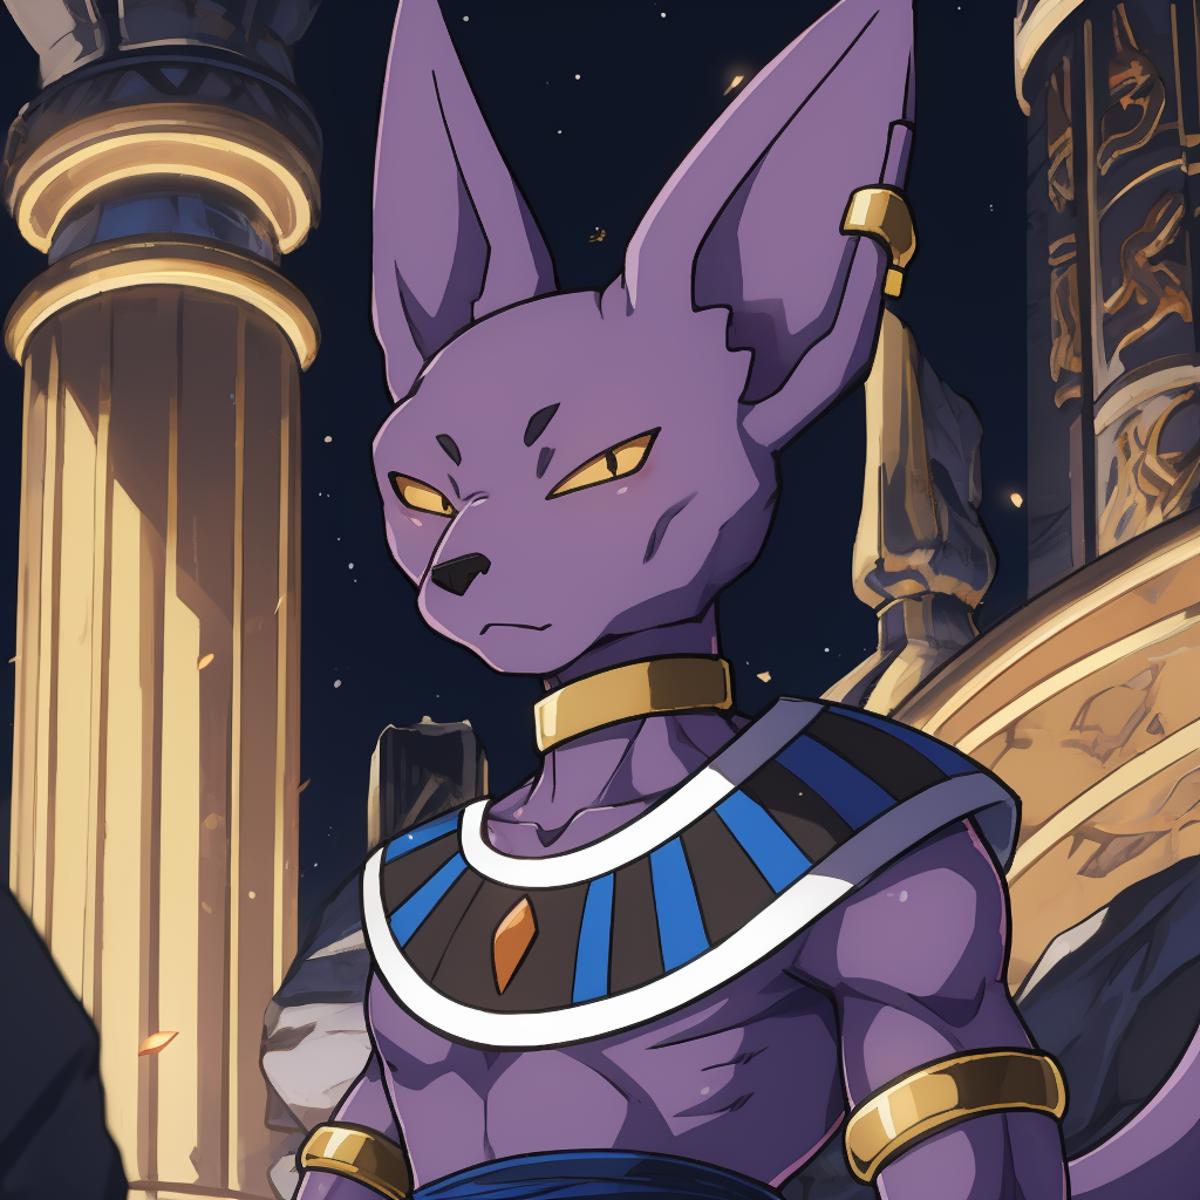 Beerus image by infamous__fish